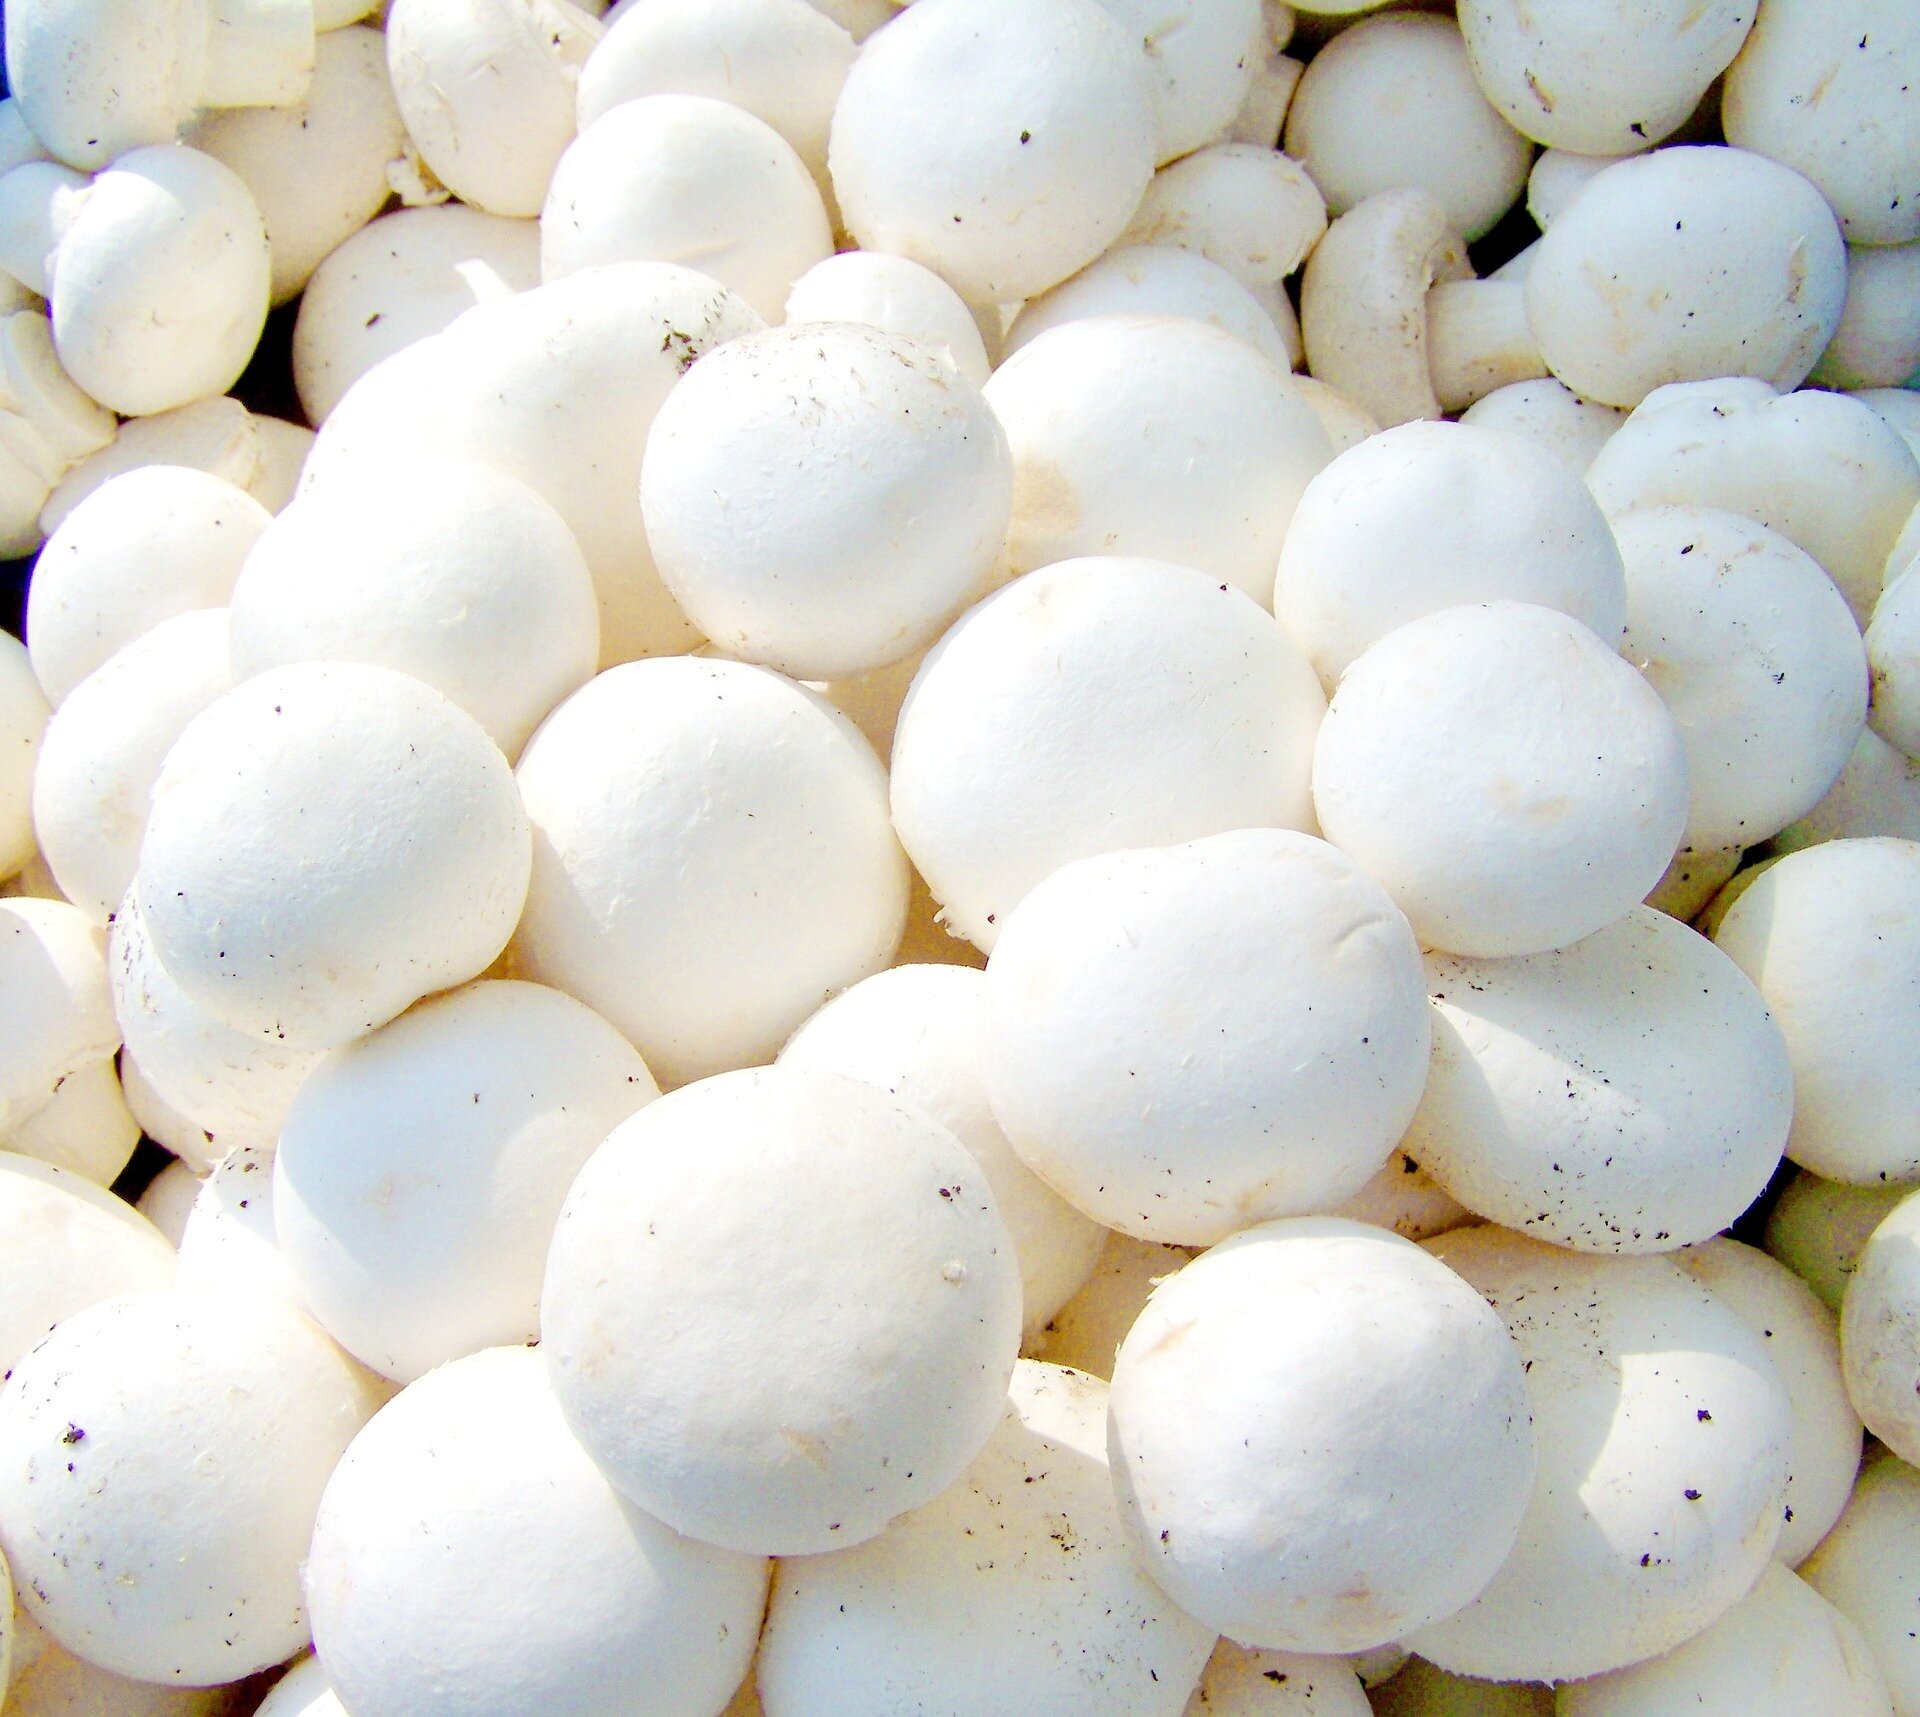 White button mushrooms could slow progression of prostate cancer